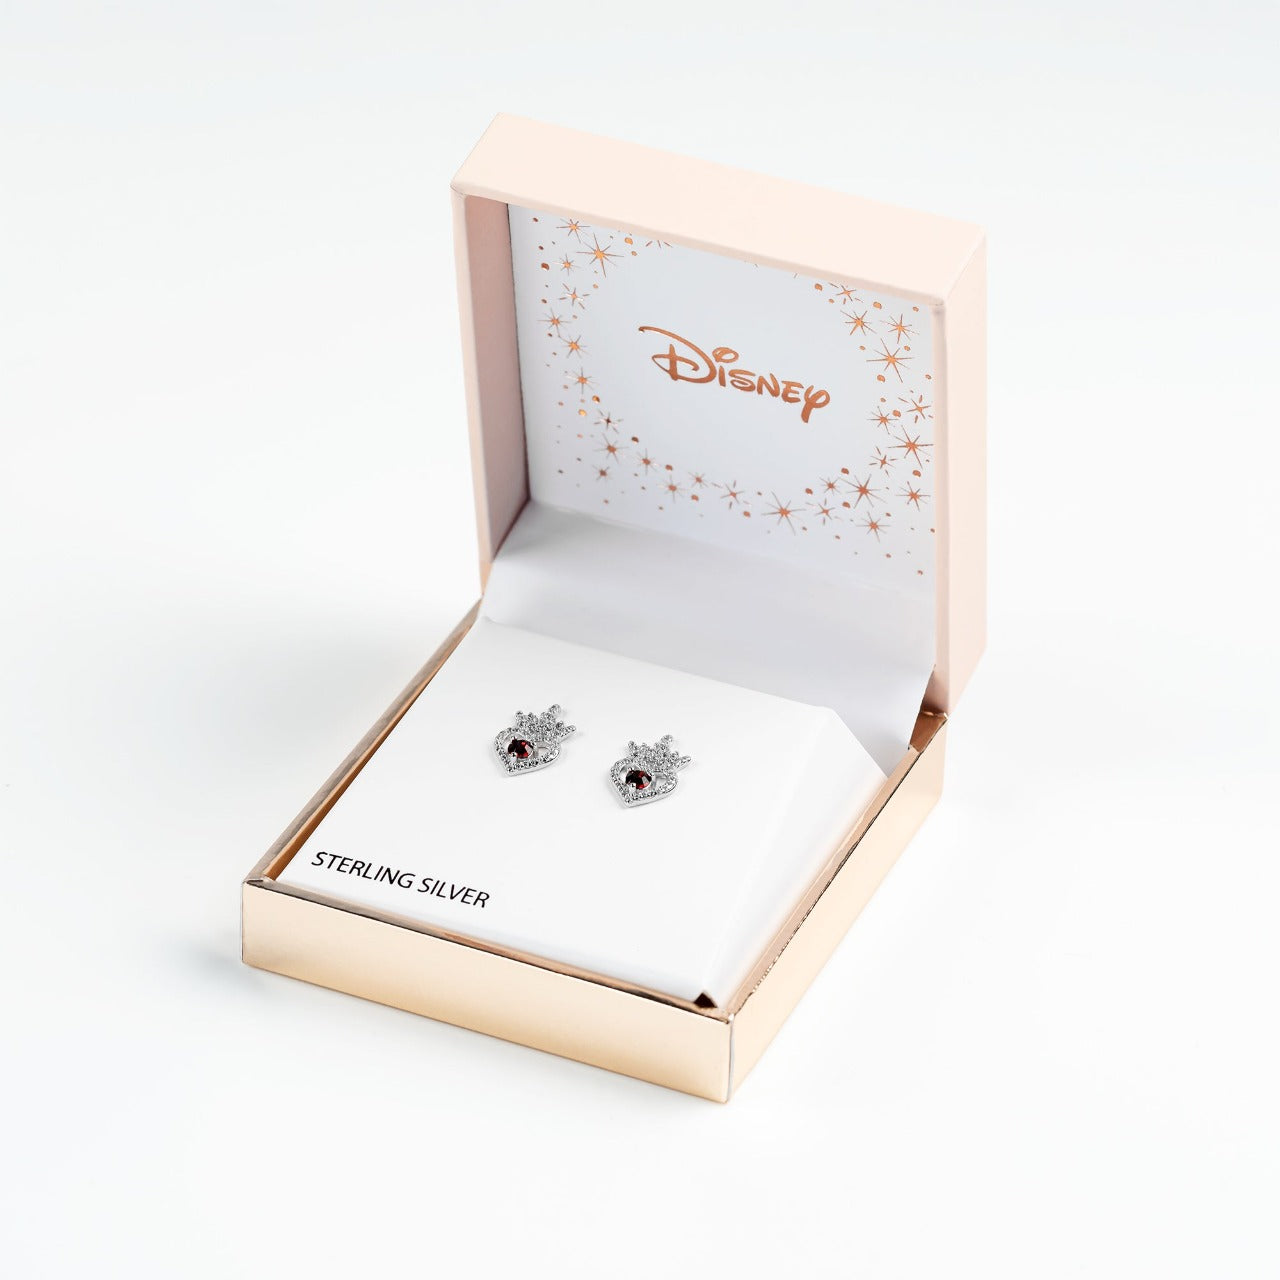 Disney Princess Sterling Silver Birthstone Crown Earrings – January  Beautiful silver Birthstone princess crown earrings with CZ crystals adding a feminine touch to the Disney classic piece of Jewellery.  Trendy and fashionable design, the Disney princess sterling silver earrings add a chic, fun touch to any outfit. the perfect gift for any Disney Princess fan